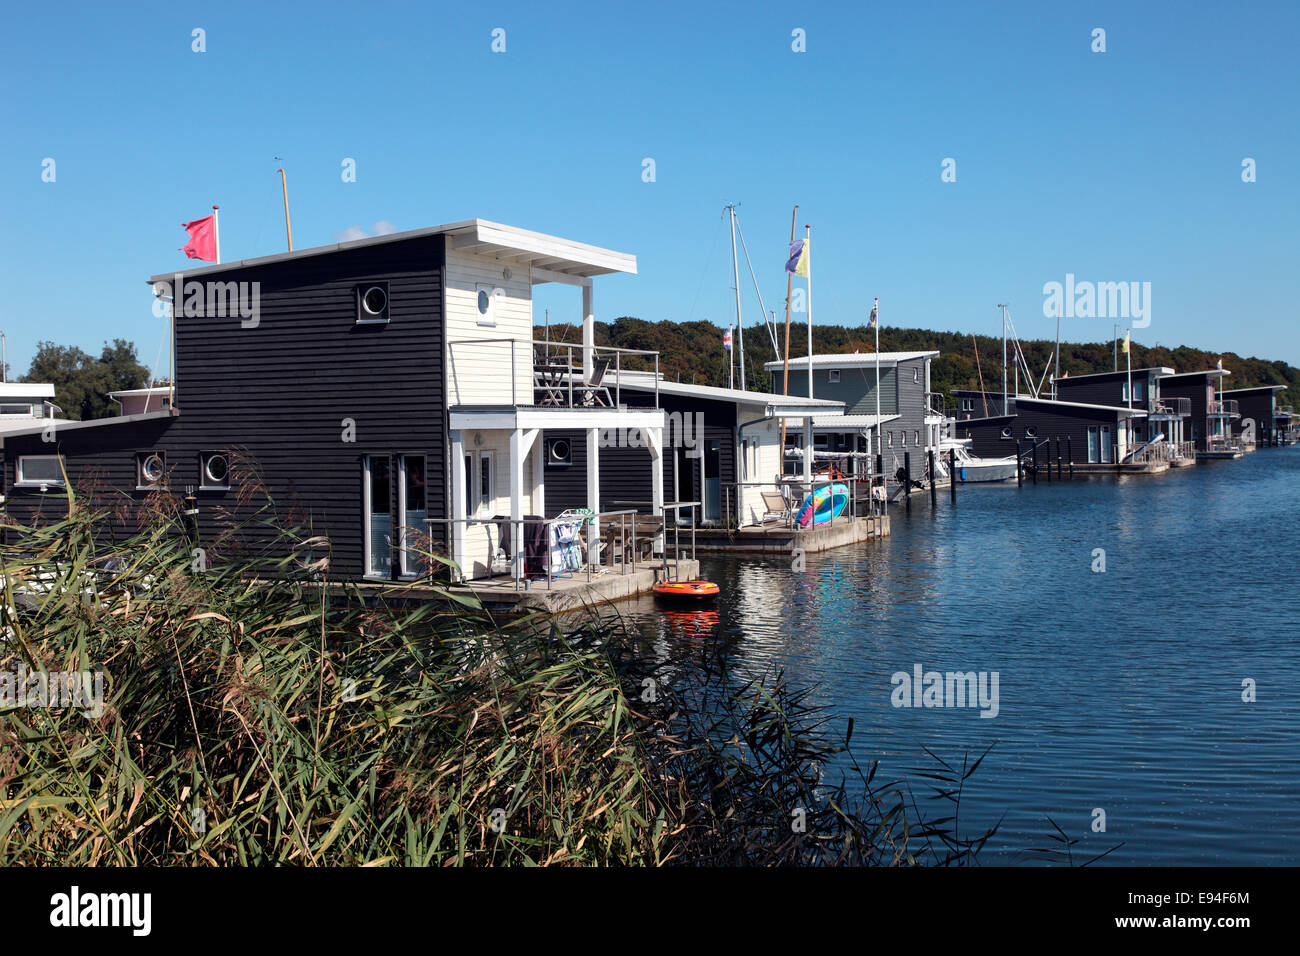 Floating holiday apartments at the IM Jaich resort village, Lauterbach on Rugen Island. Stock Photo